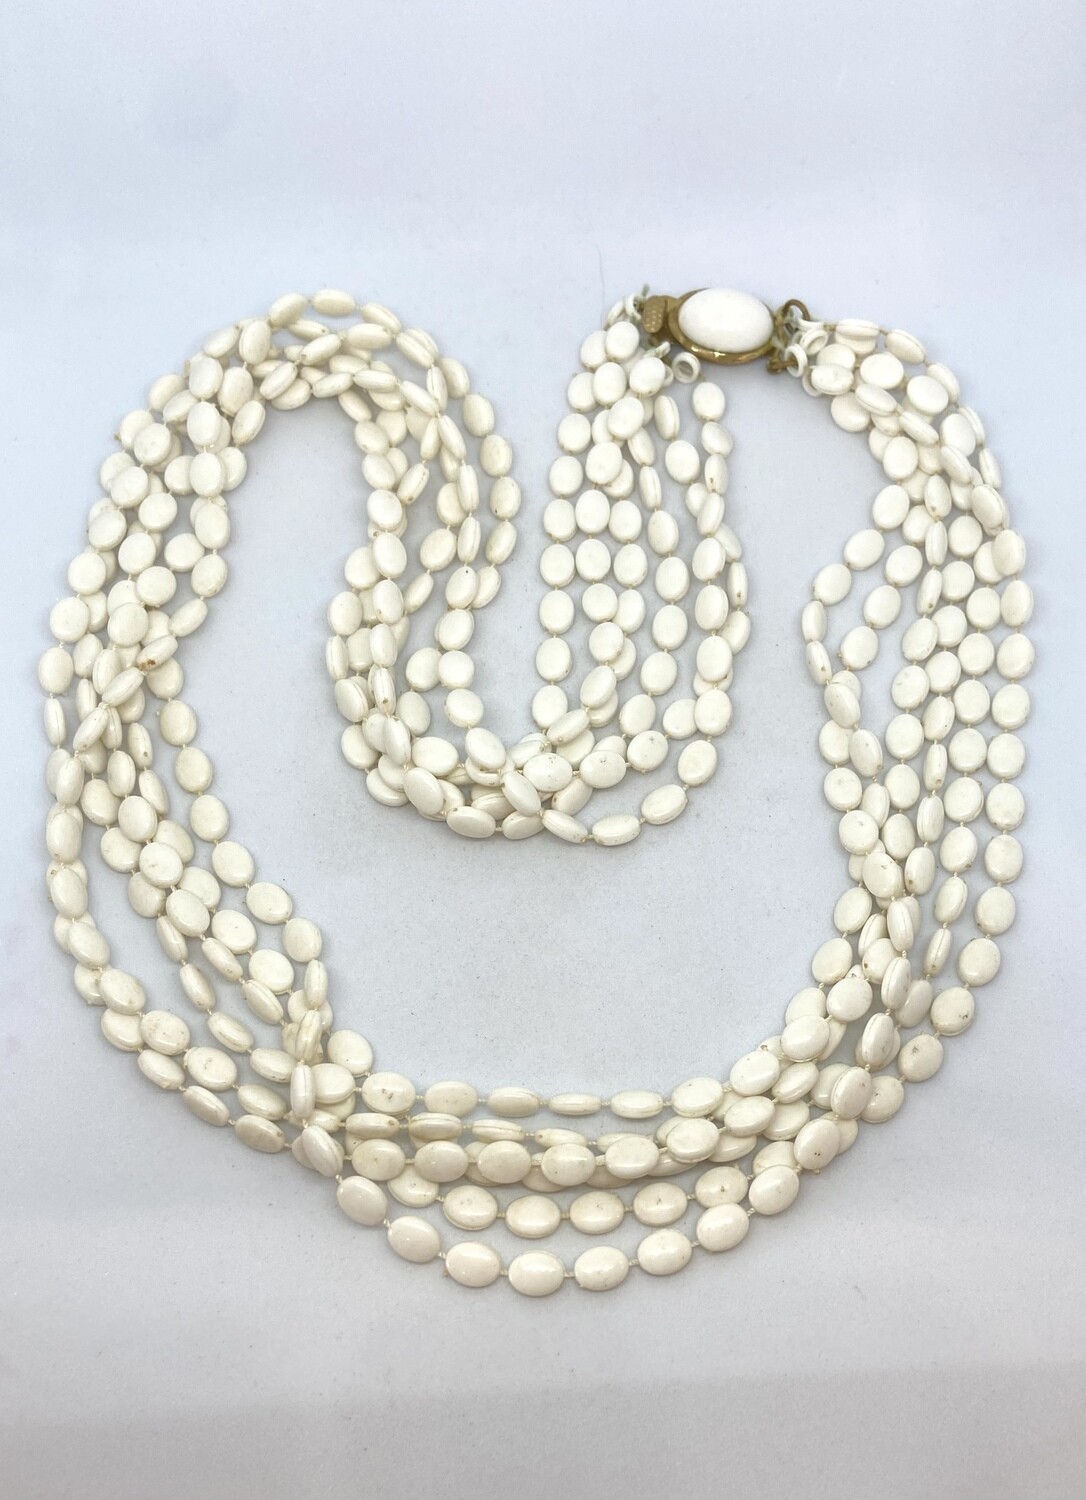 6 Strand White Bead Necklace With White Stone Clasp